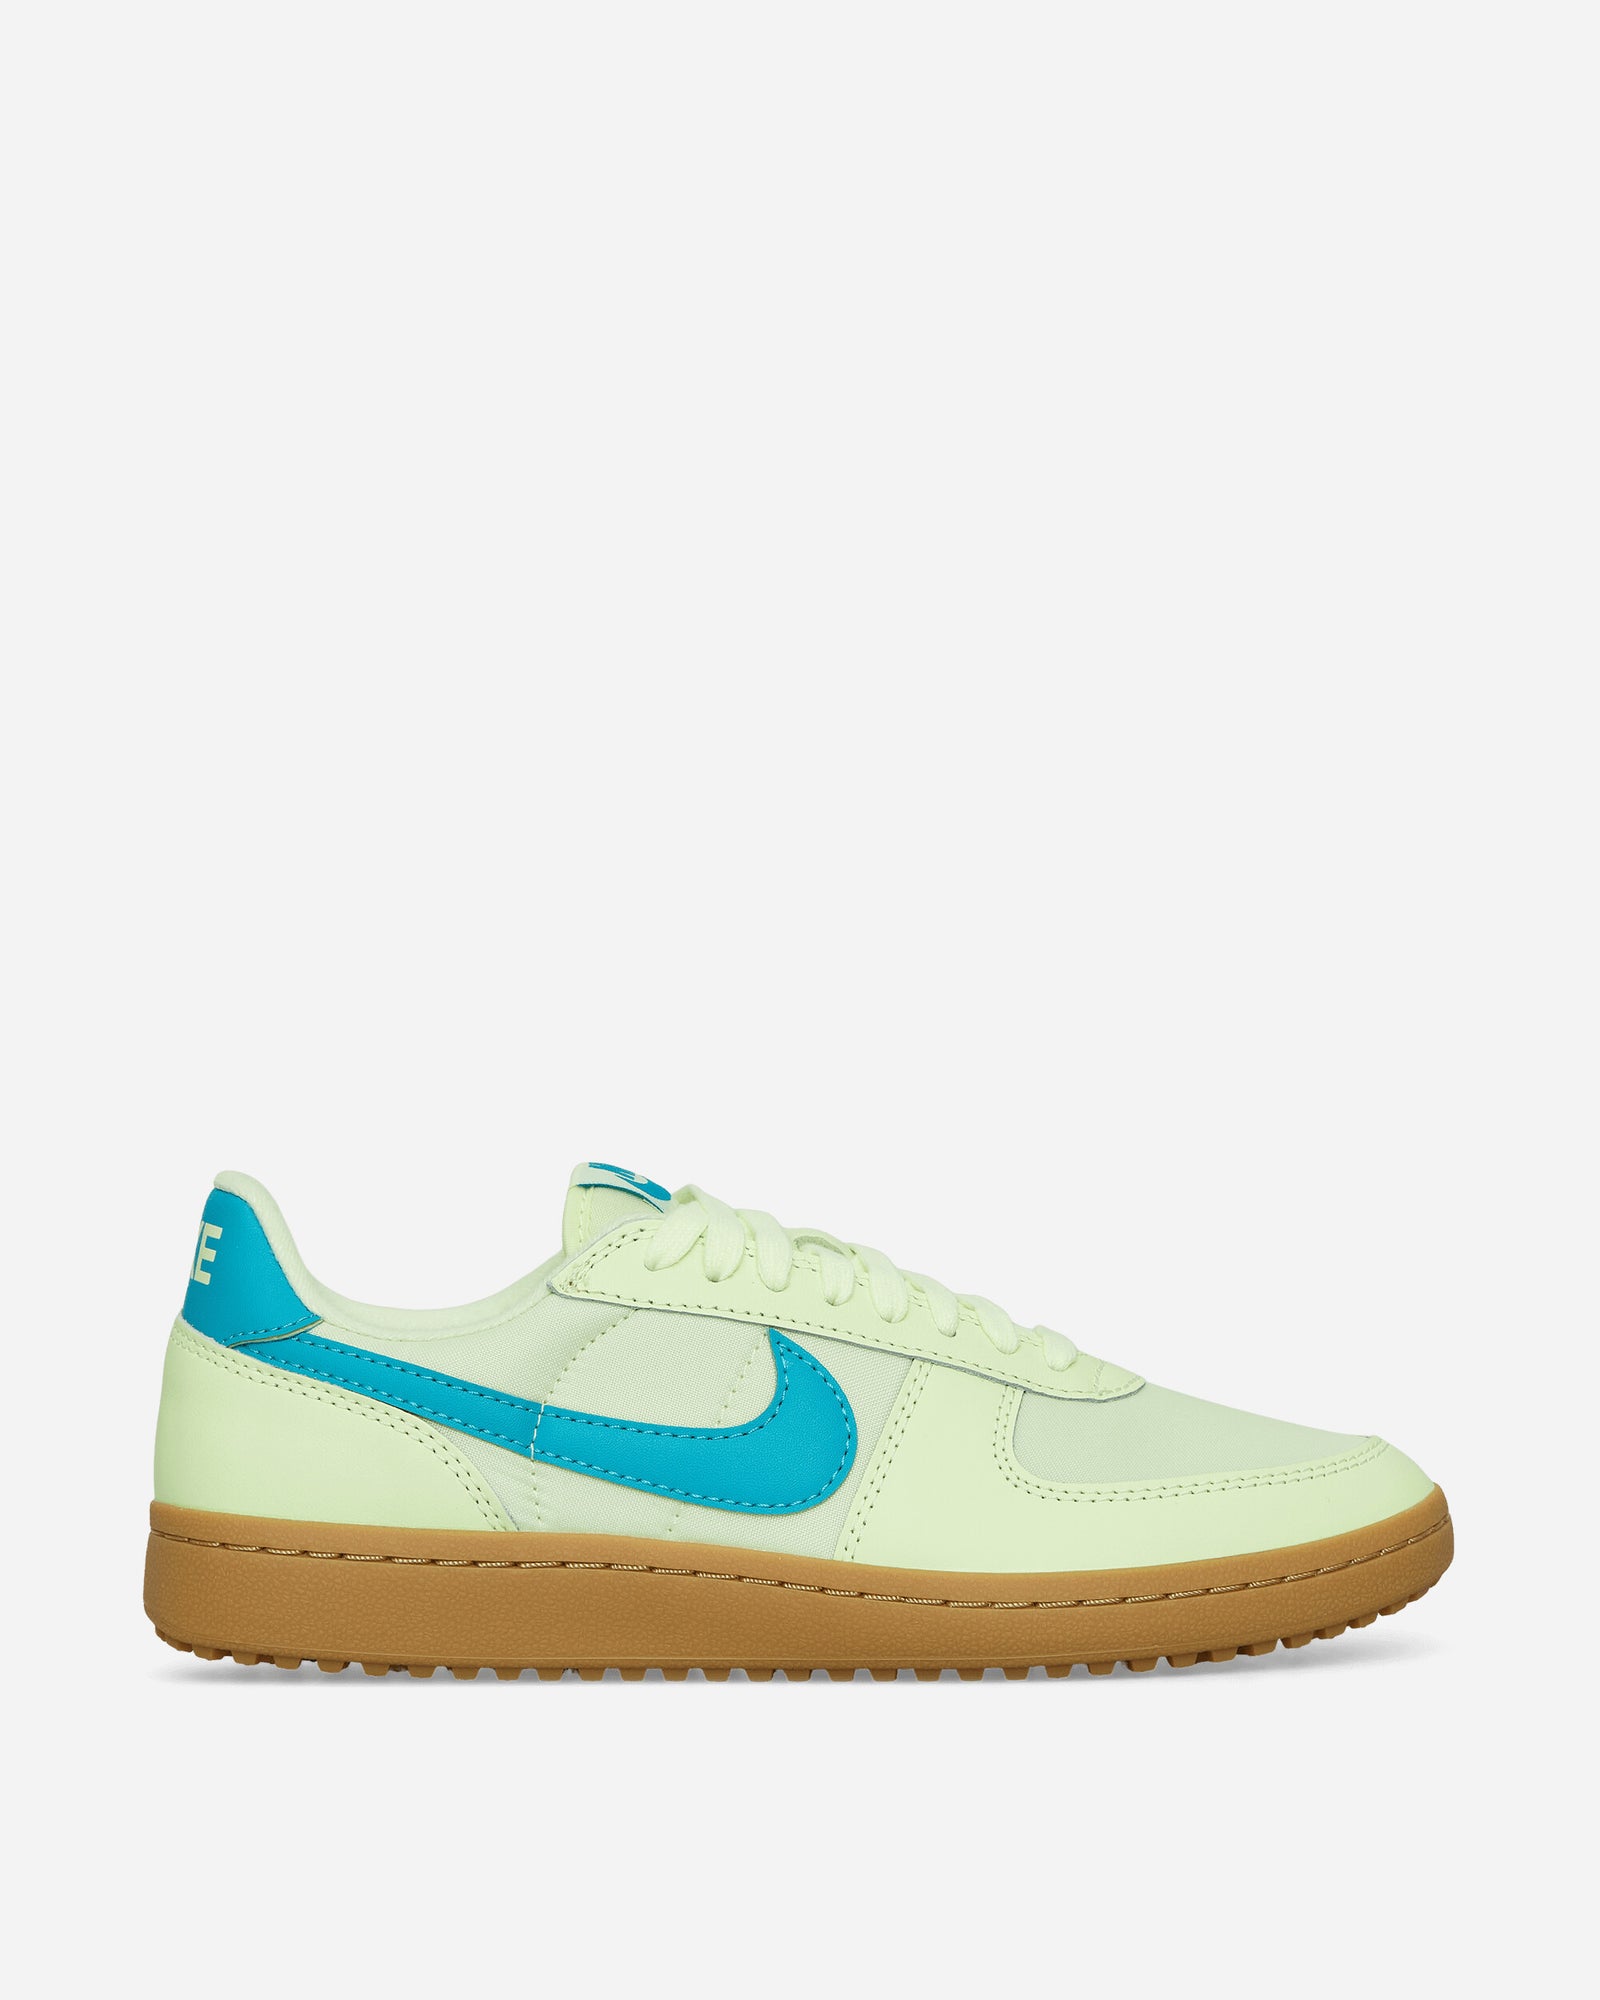 Nike Field General  82 Sneakers Barely Volt / Dusty Cactus